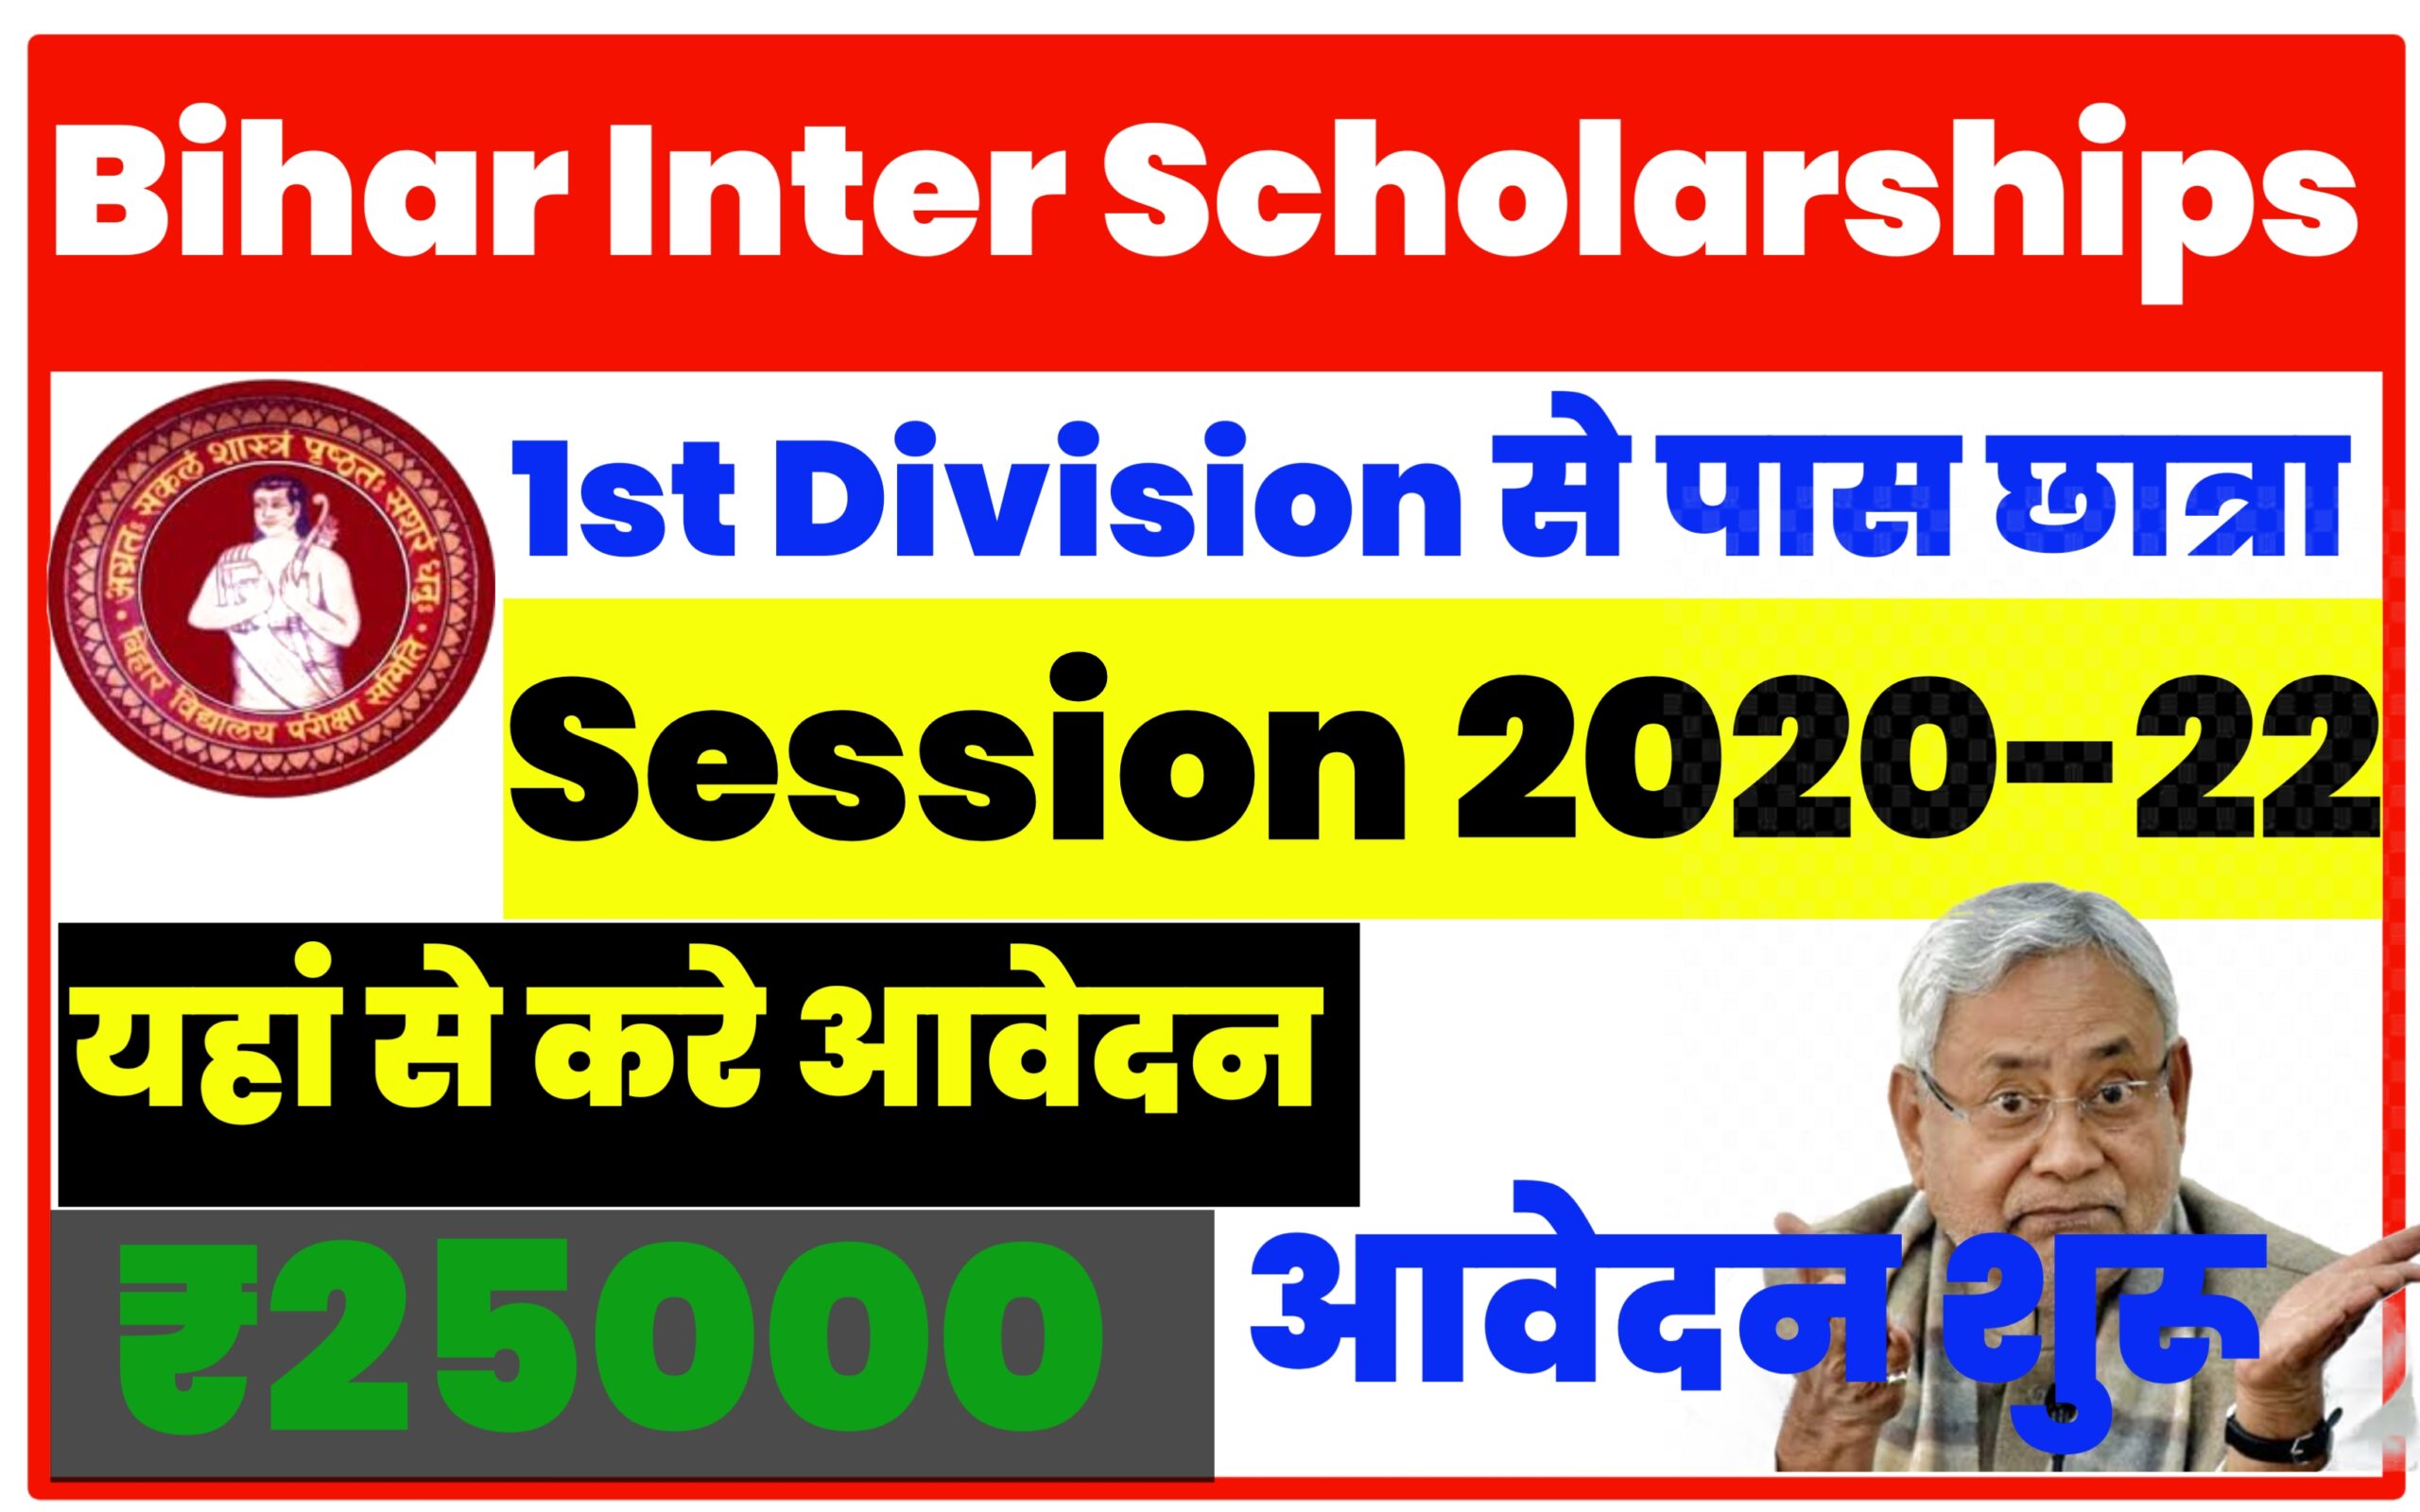 Bihar Board 12th 1st Division Scholarship 2022 For 25000 Rs: List, Date & Apply Online Bihar Board inter 1st Division Scholarship 2022